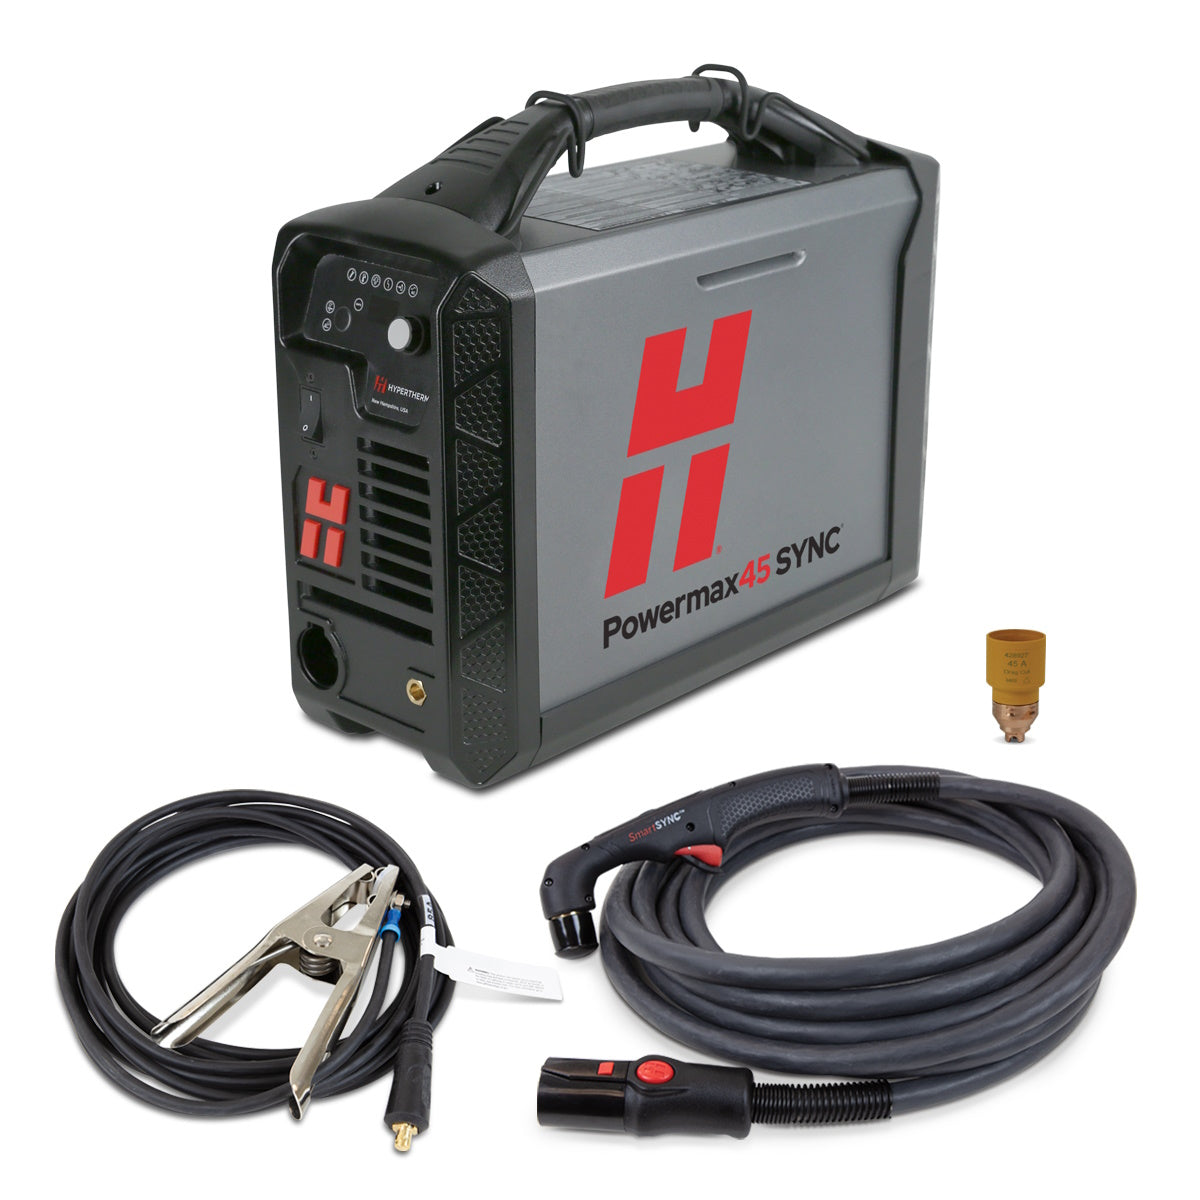 Hypertherm Powermax45 SYNC Plasma Cutter with 50ft Hand Torch (088561)